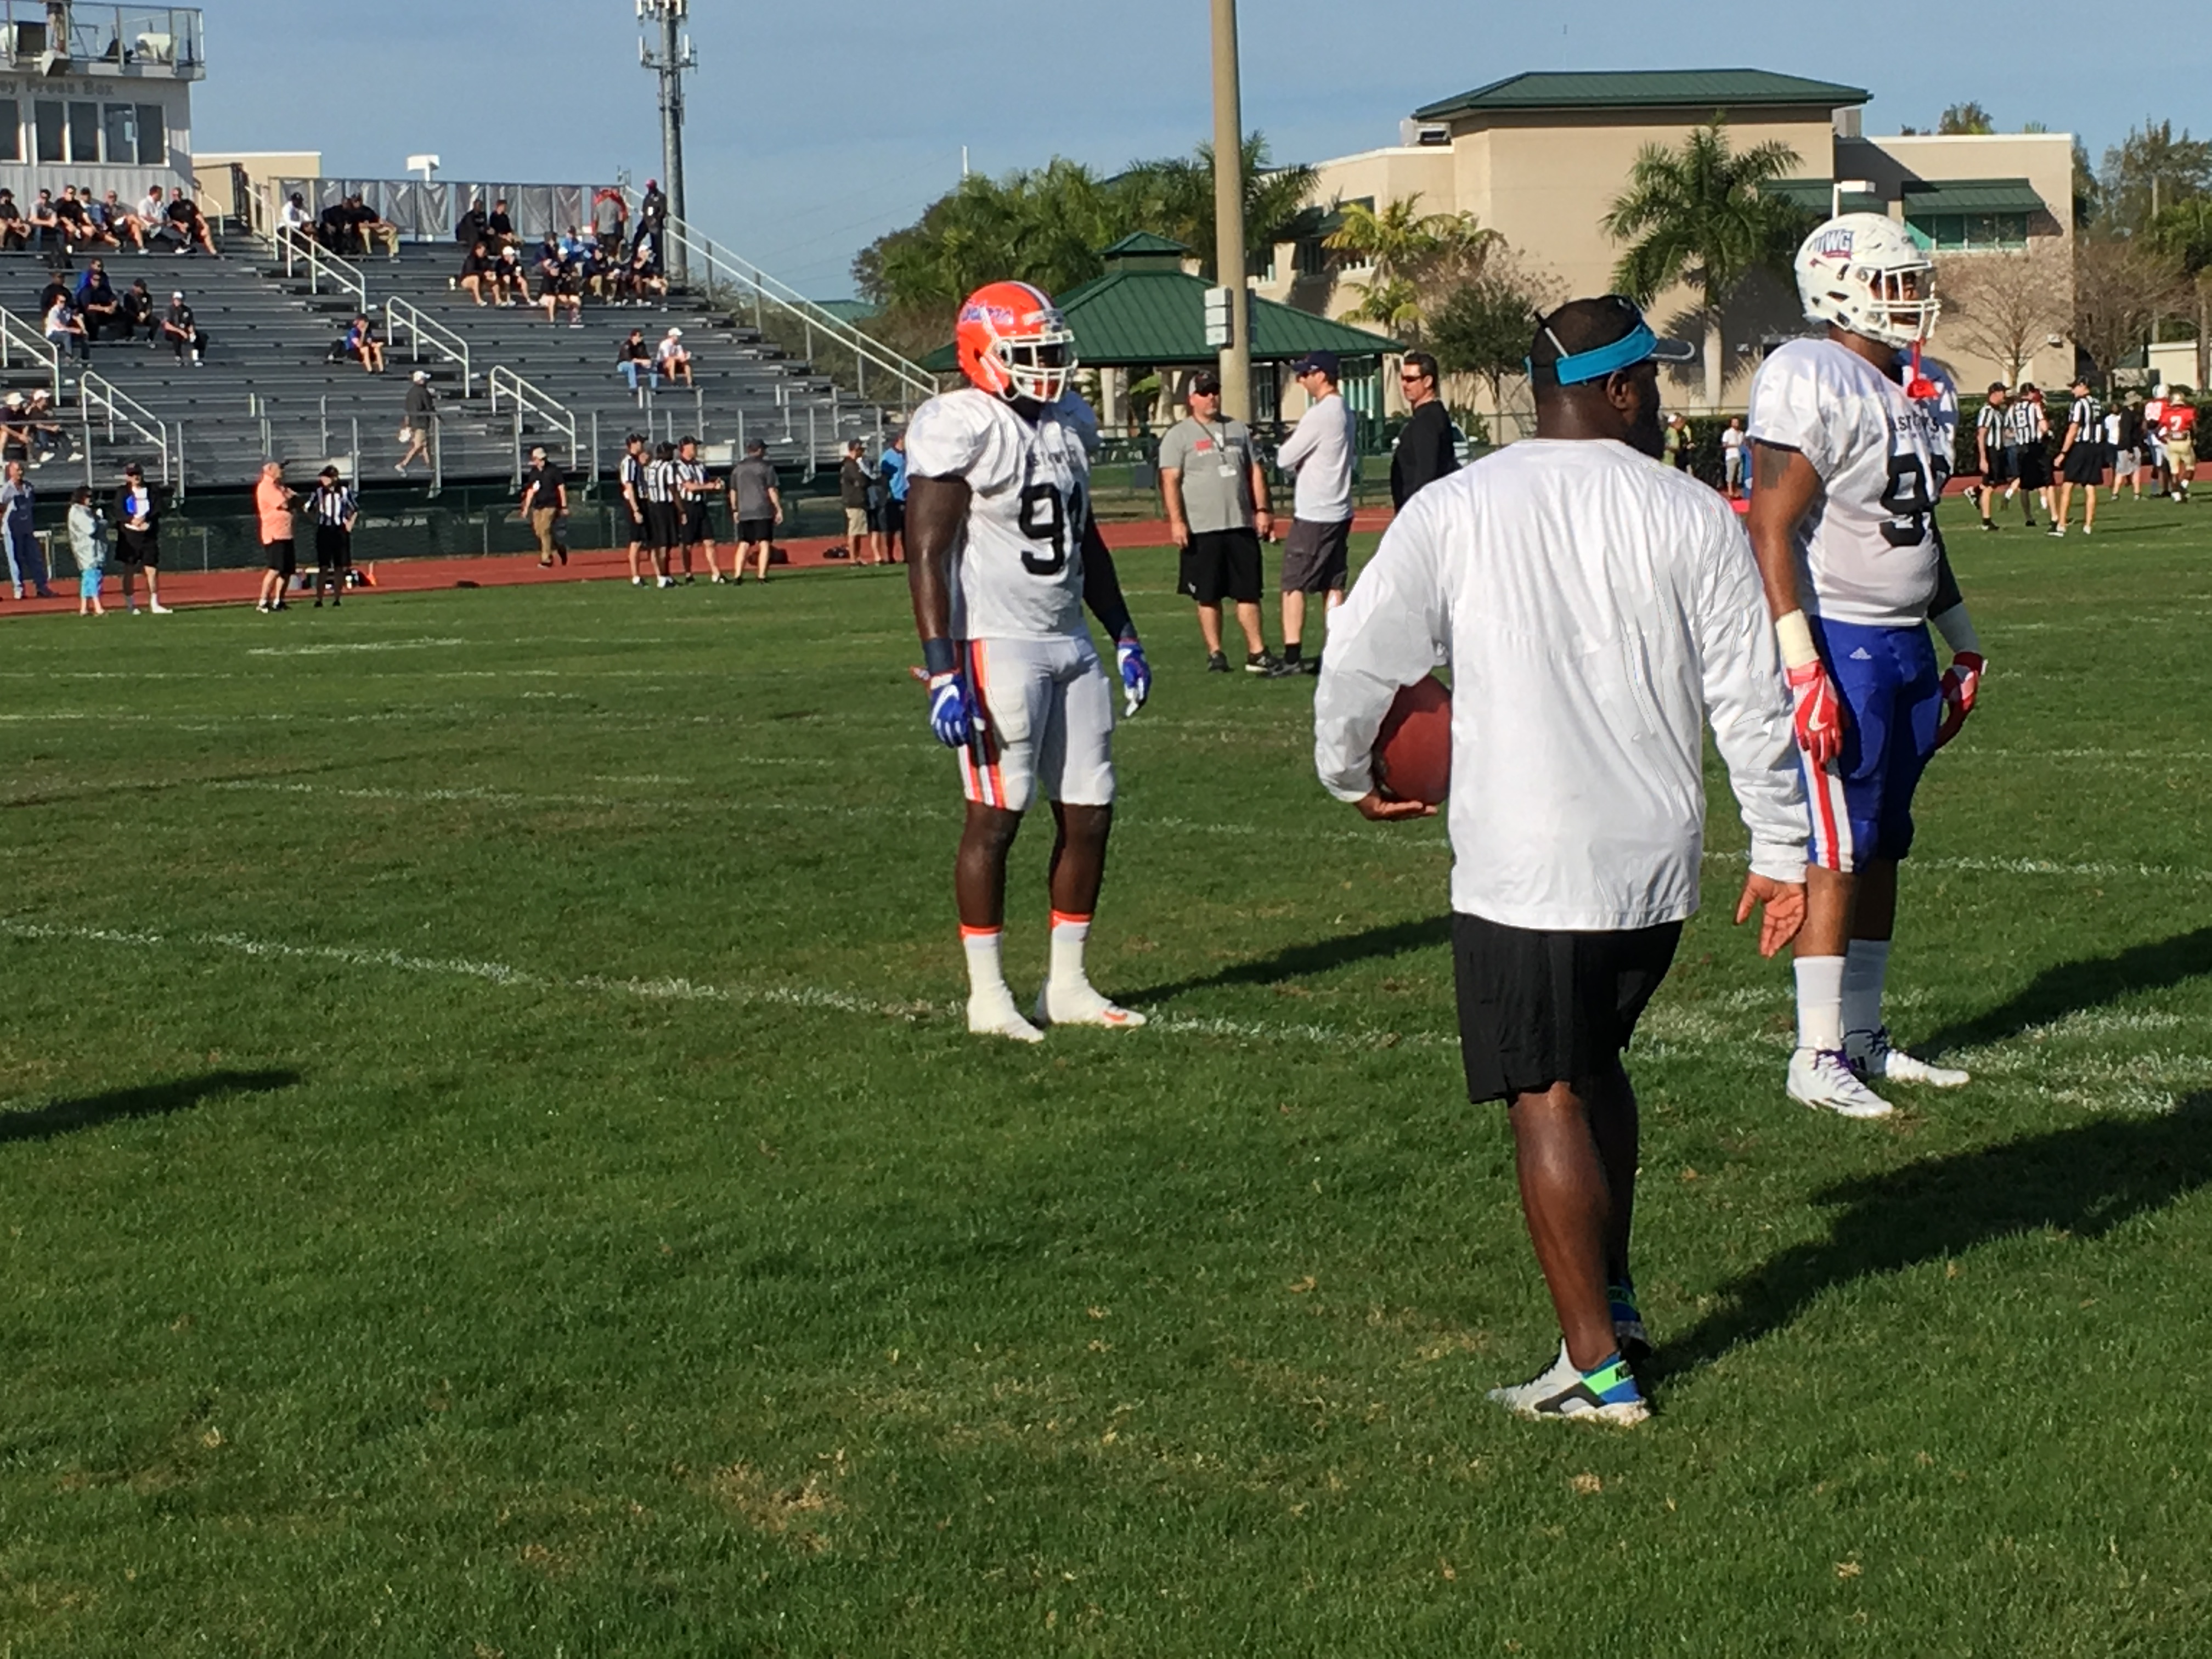 Florida's Cox Jr. making most of Shrine Game while his dad ... - Firstcoastnews.com